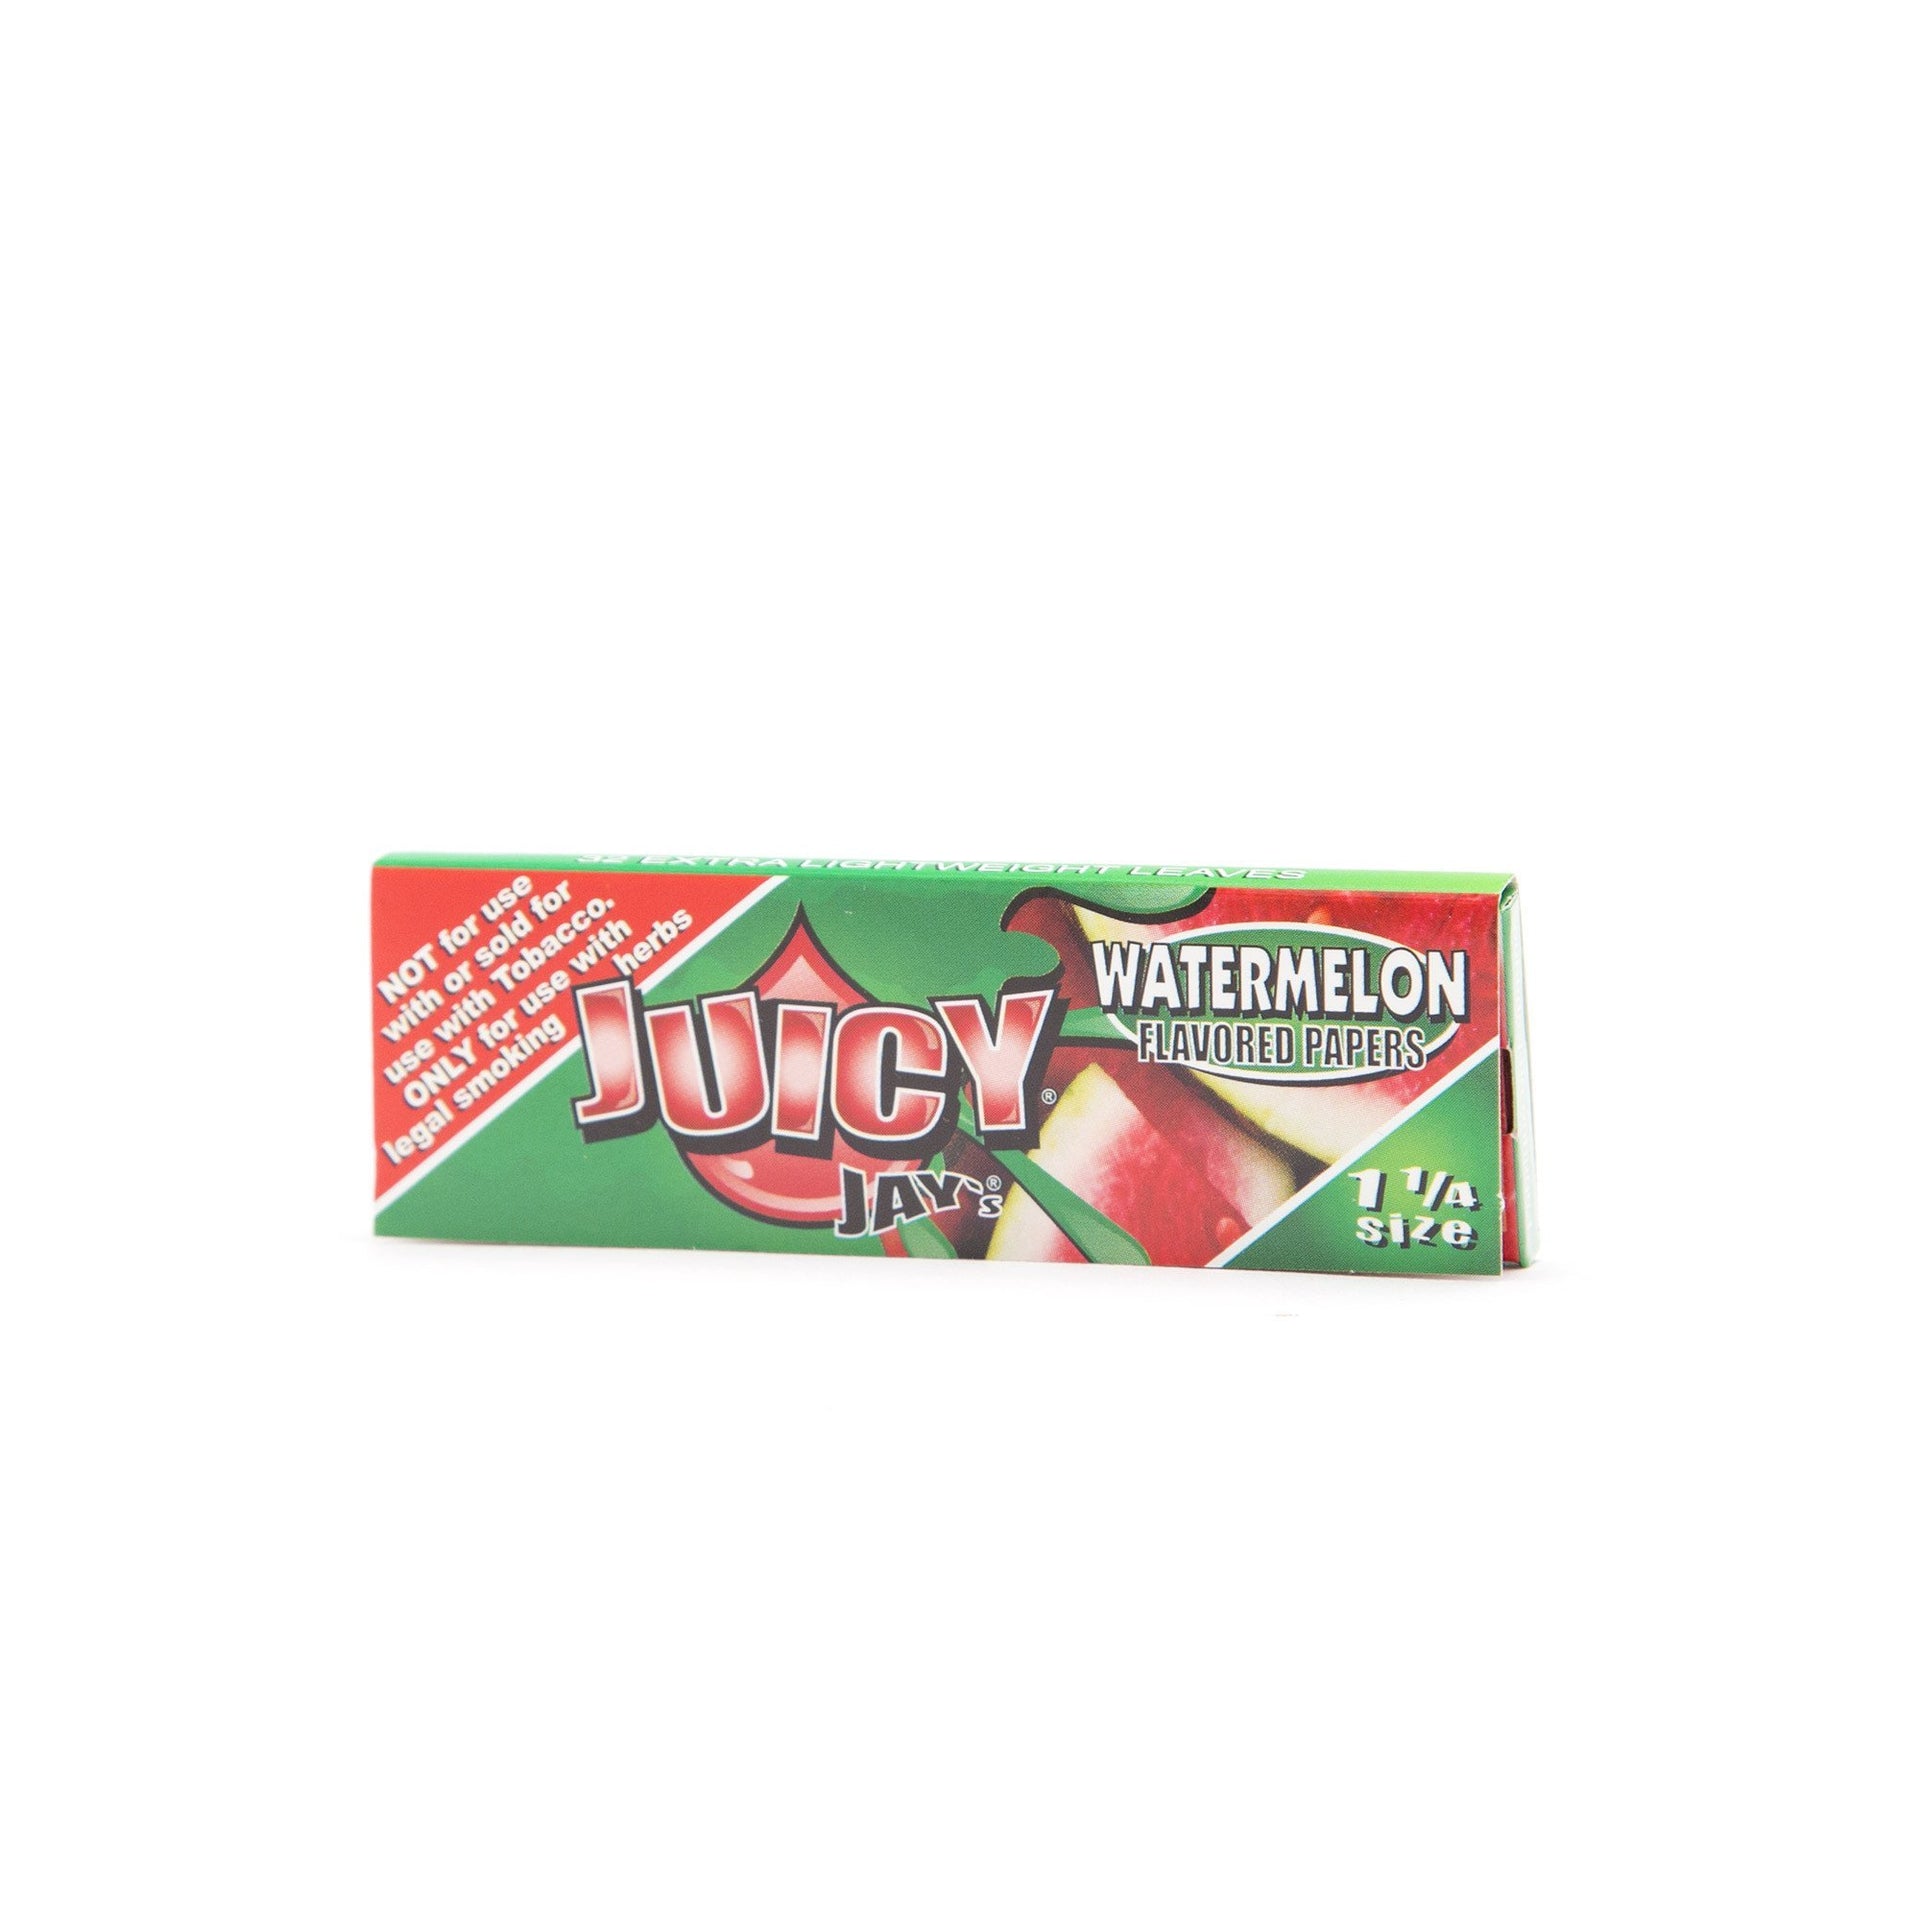 Juicy Jay's 1 1/4in Flavored Papers - Watermelon - 420 Science - The most trusted online smoke shop.